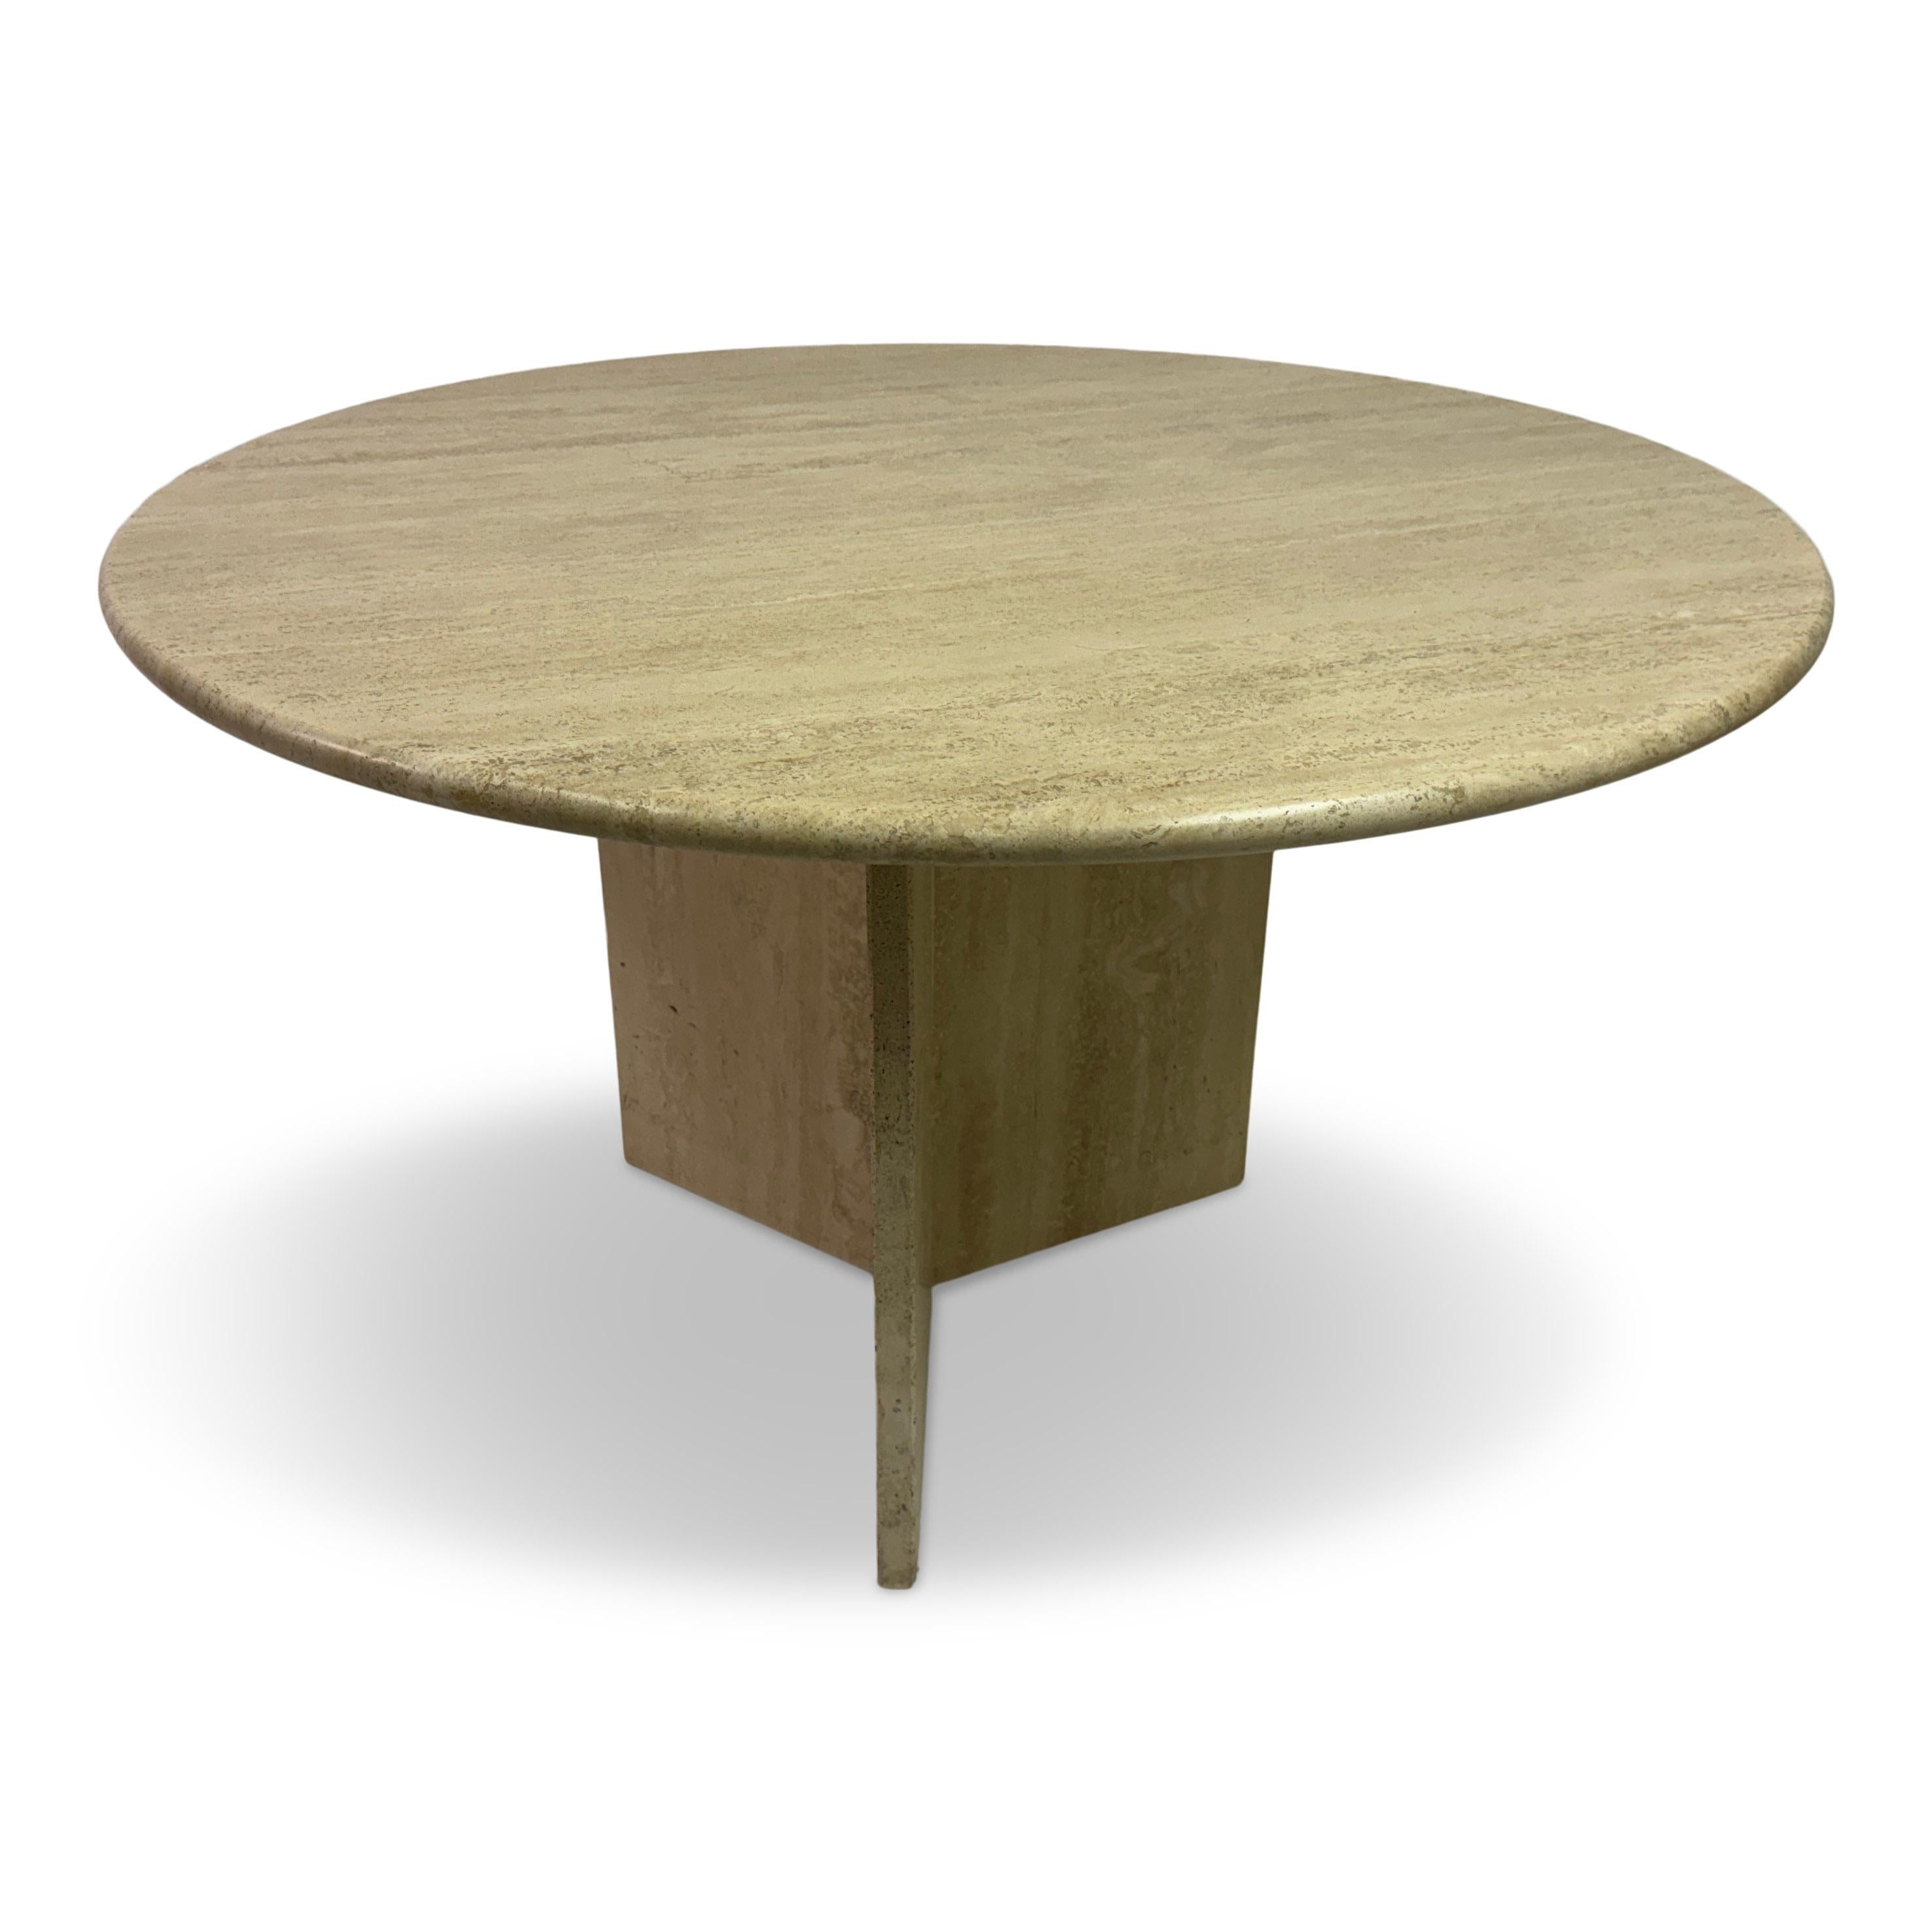 Dining table

Circular

Travertine

Three-spoke base provides stability

!970s/1980s Italy